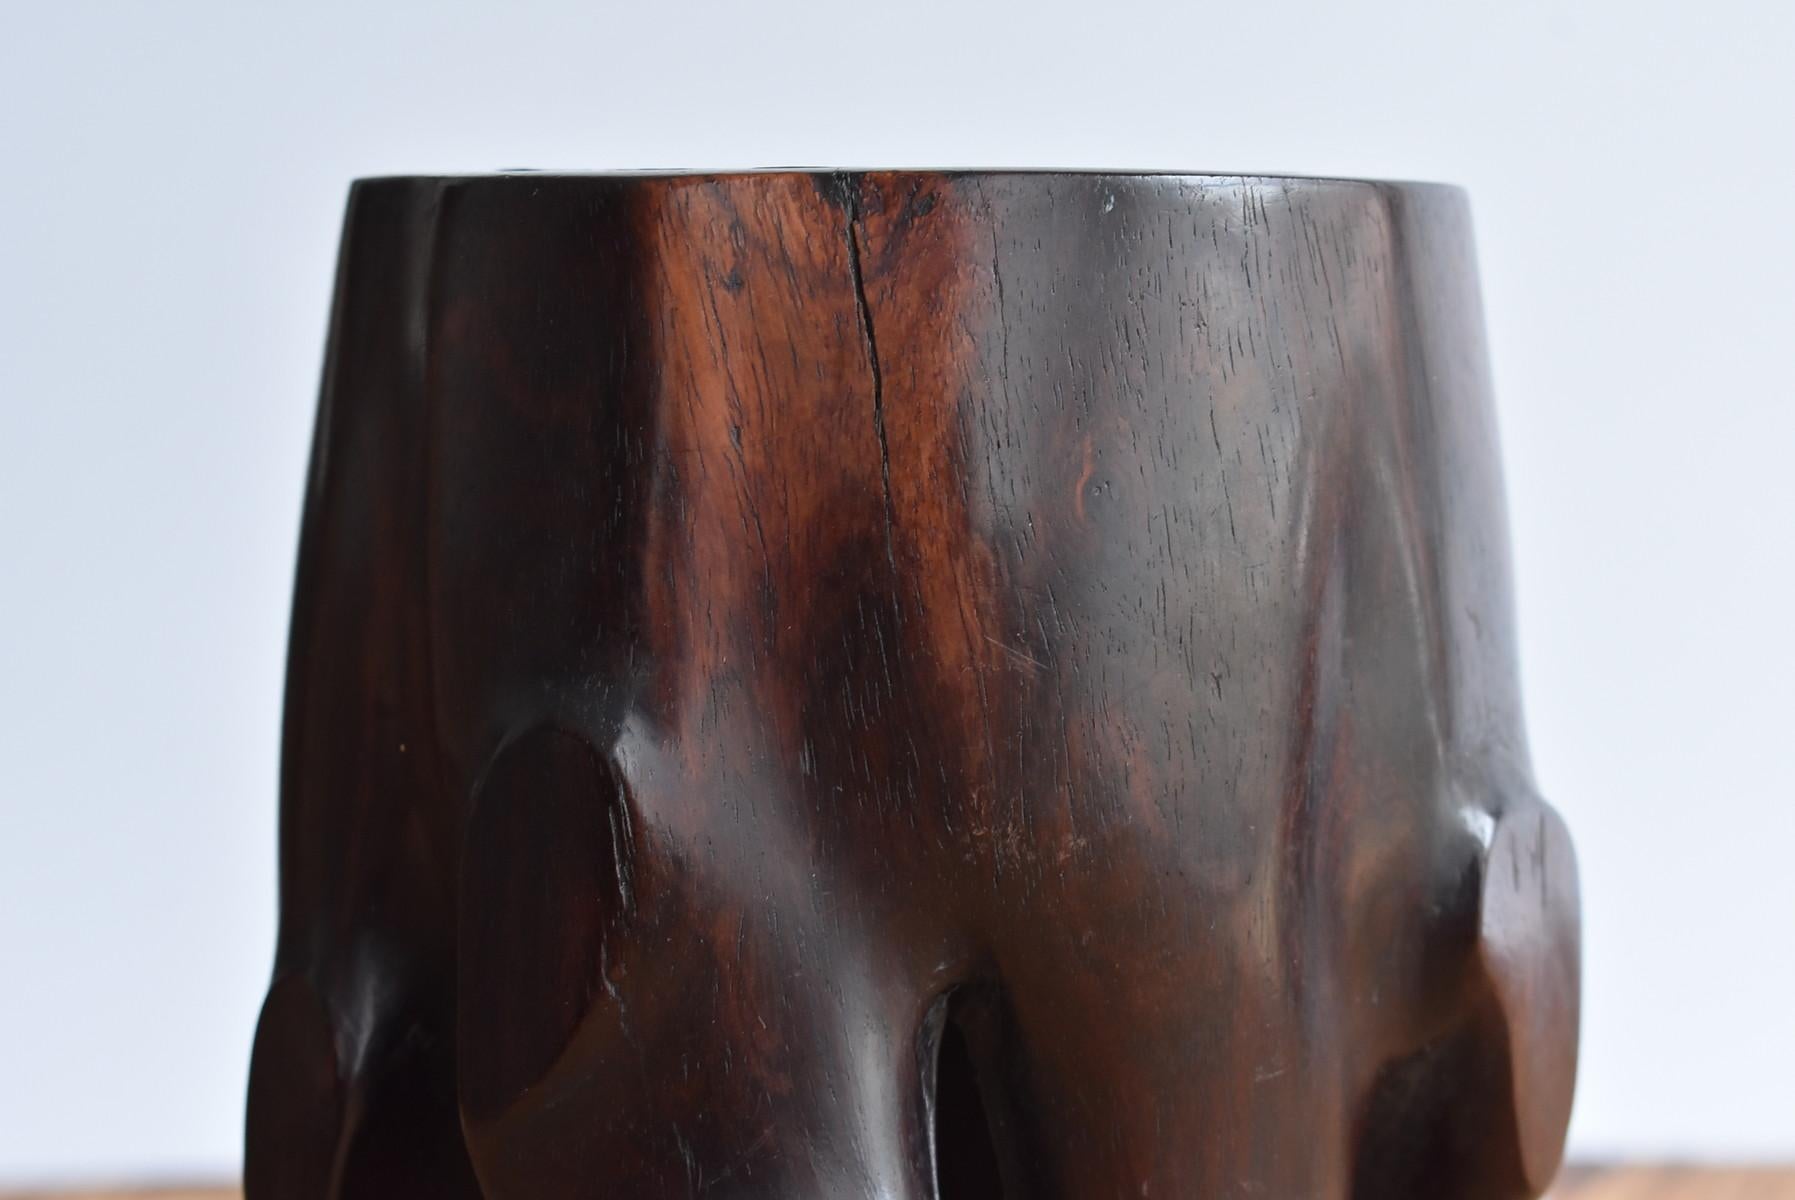 Japanese Old Wooden Vase / Small Vase Carved like a Root/1920s-1950s 3